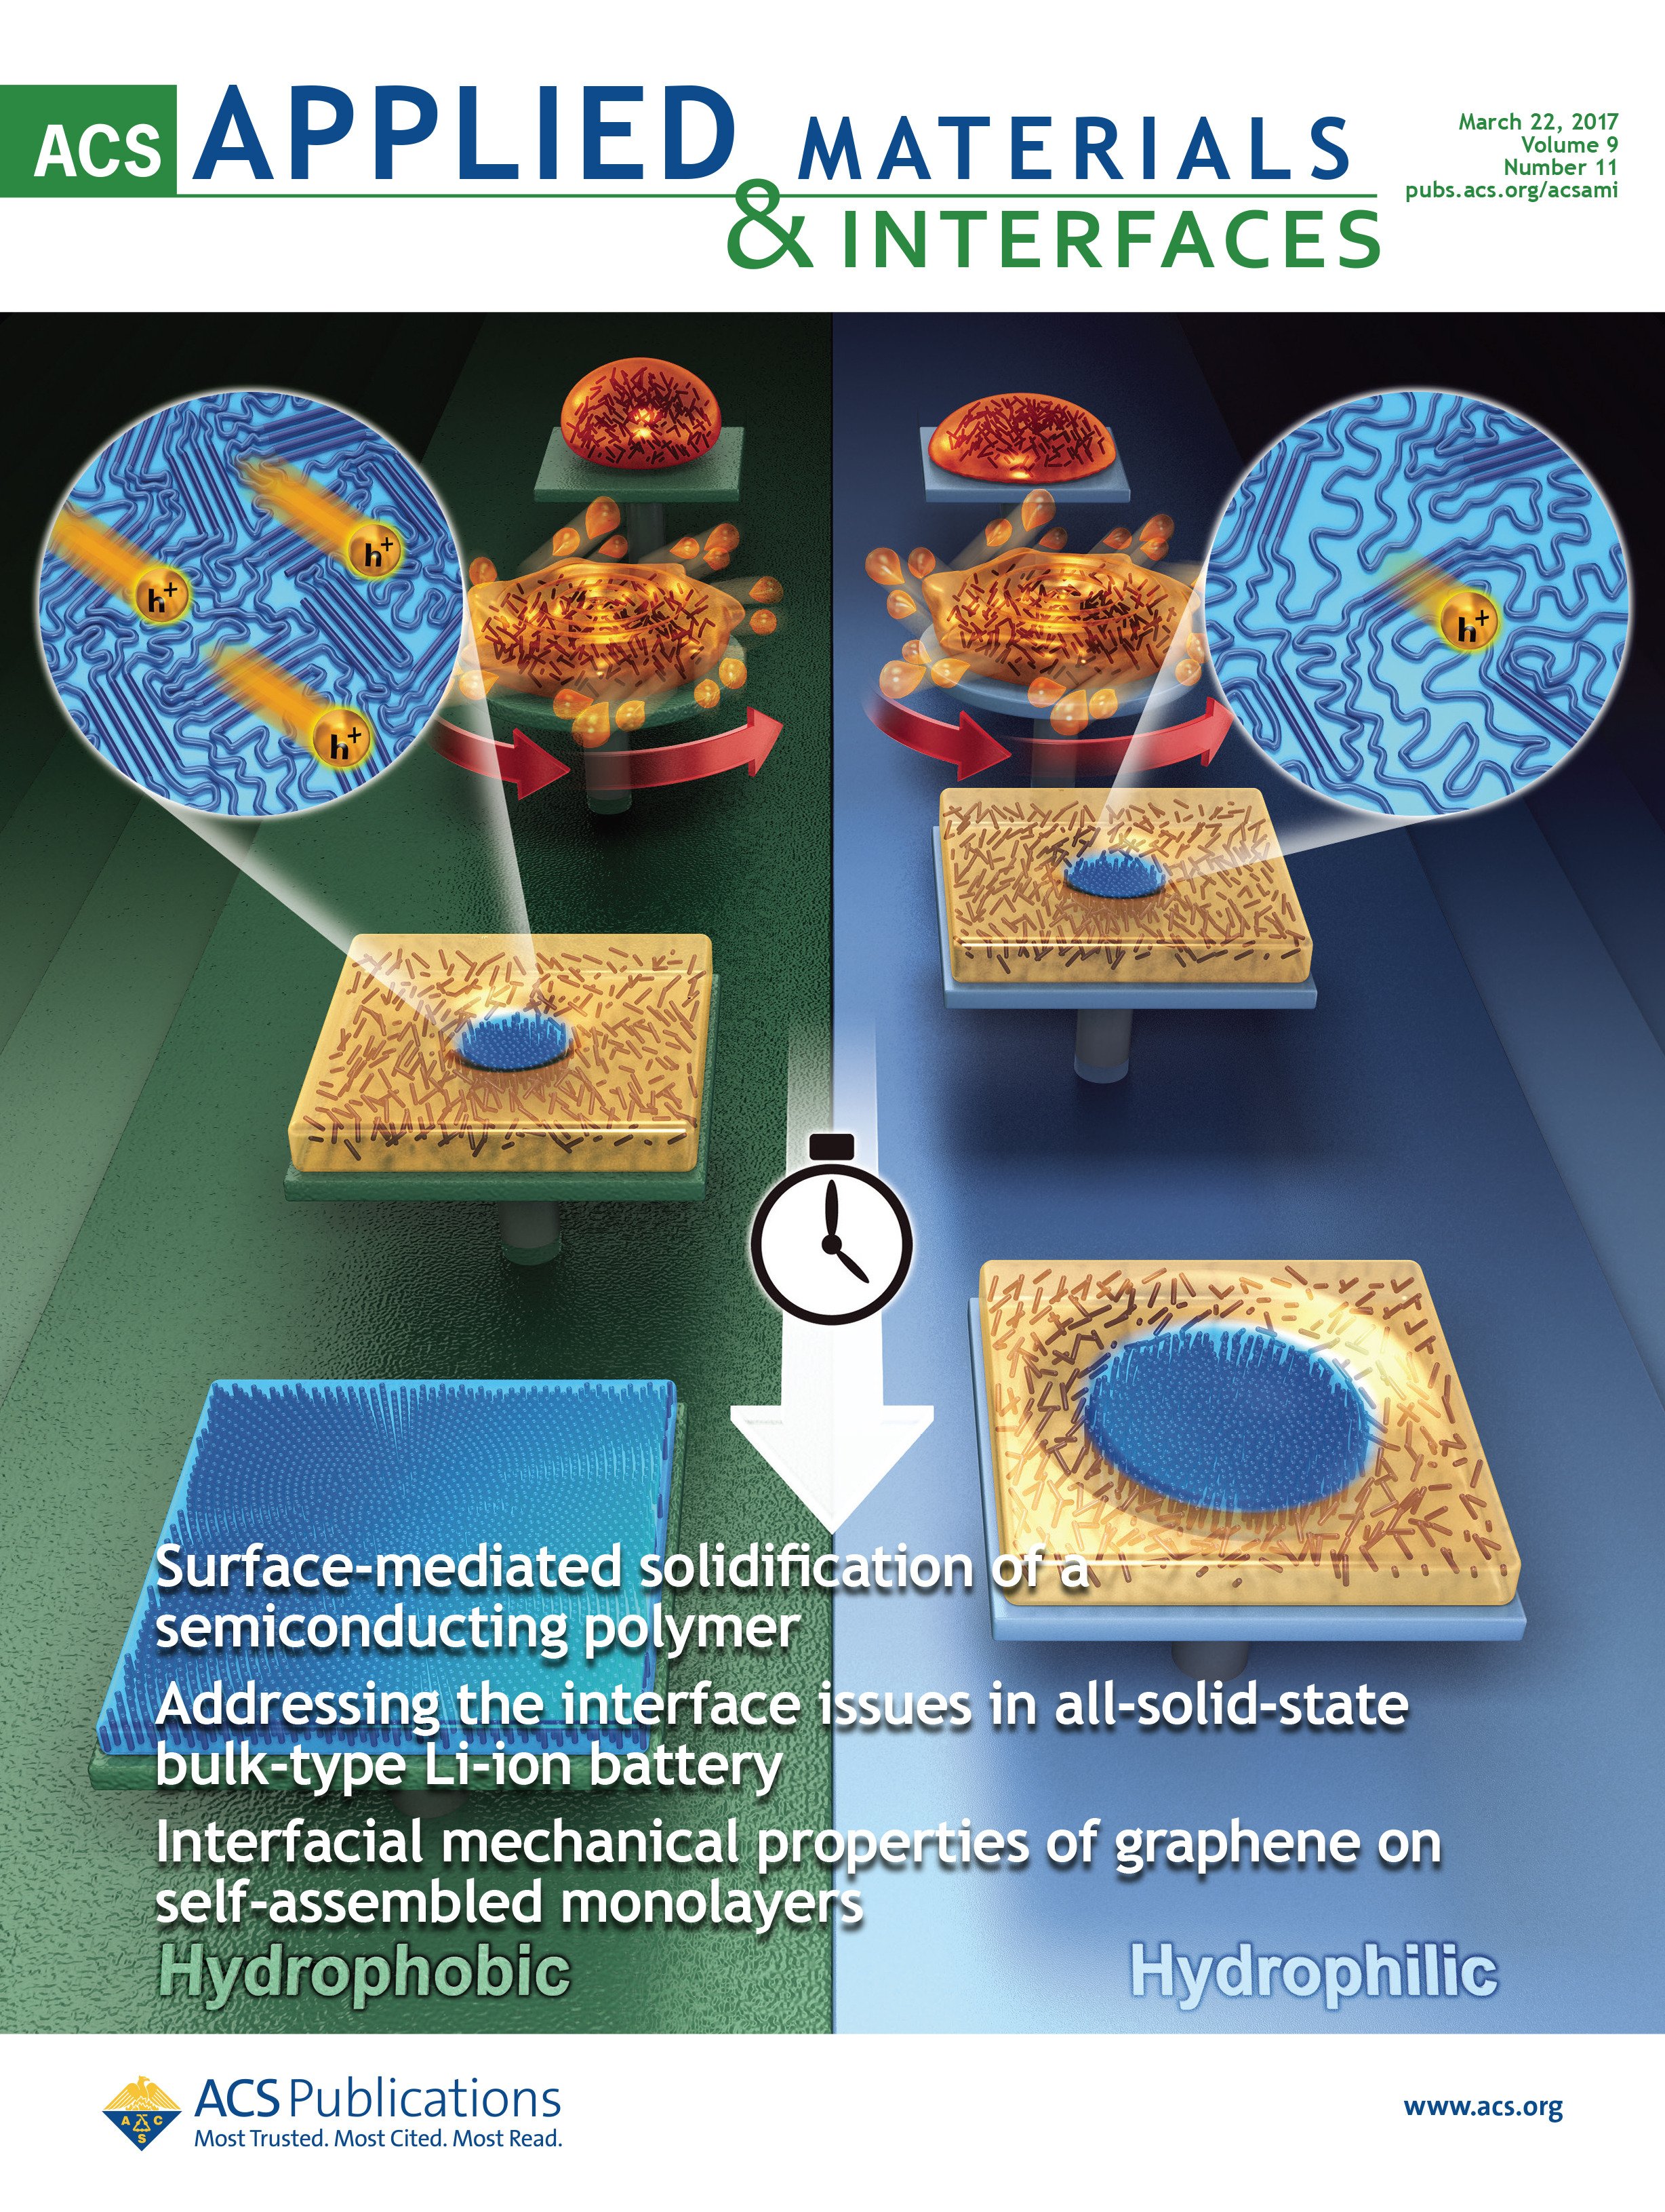 ACS Applied Interfaces on Twitter: "Check out our new issue! Cover: Surface-Mediated Solidification of a Semiconducting Polymer https://t.co/DrMQobOltw https://t.co/lpoAQ2aOfq" / Twitter